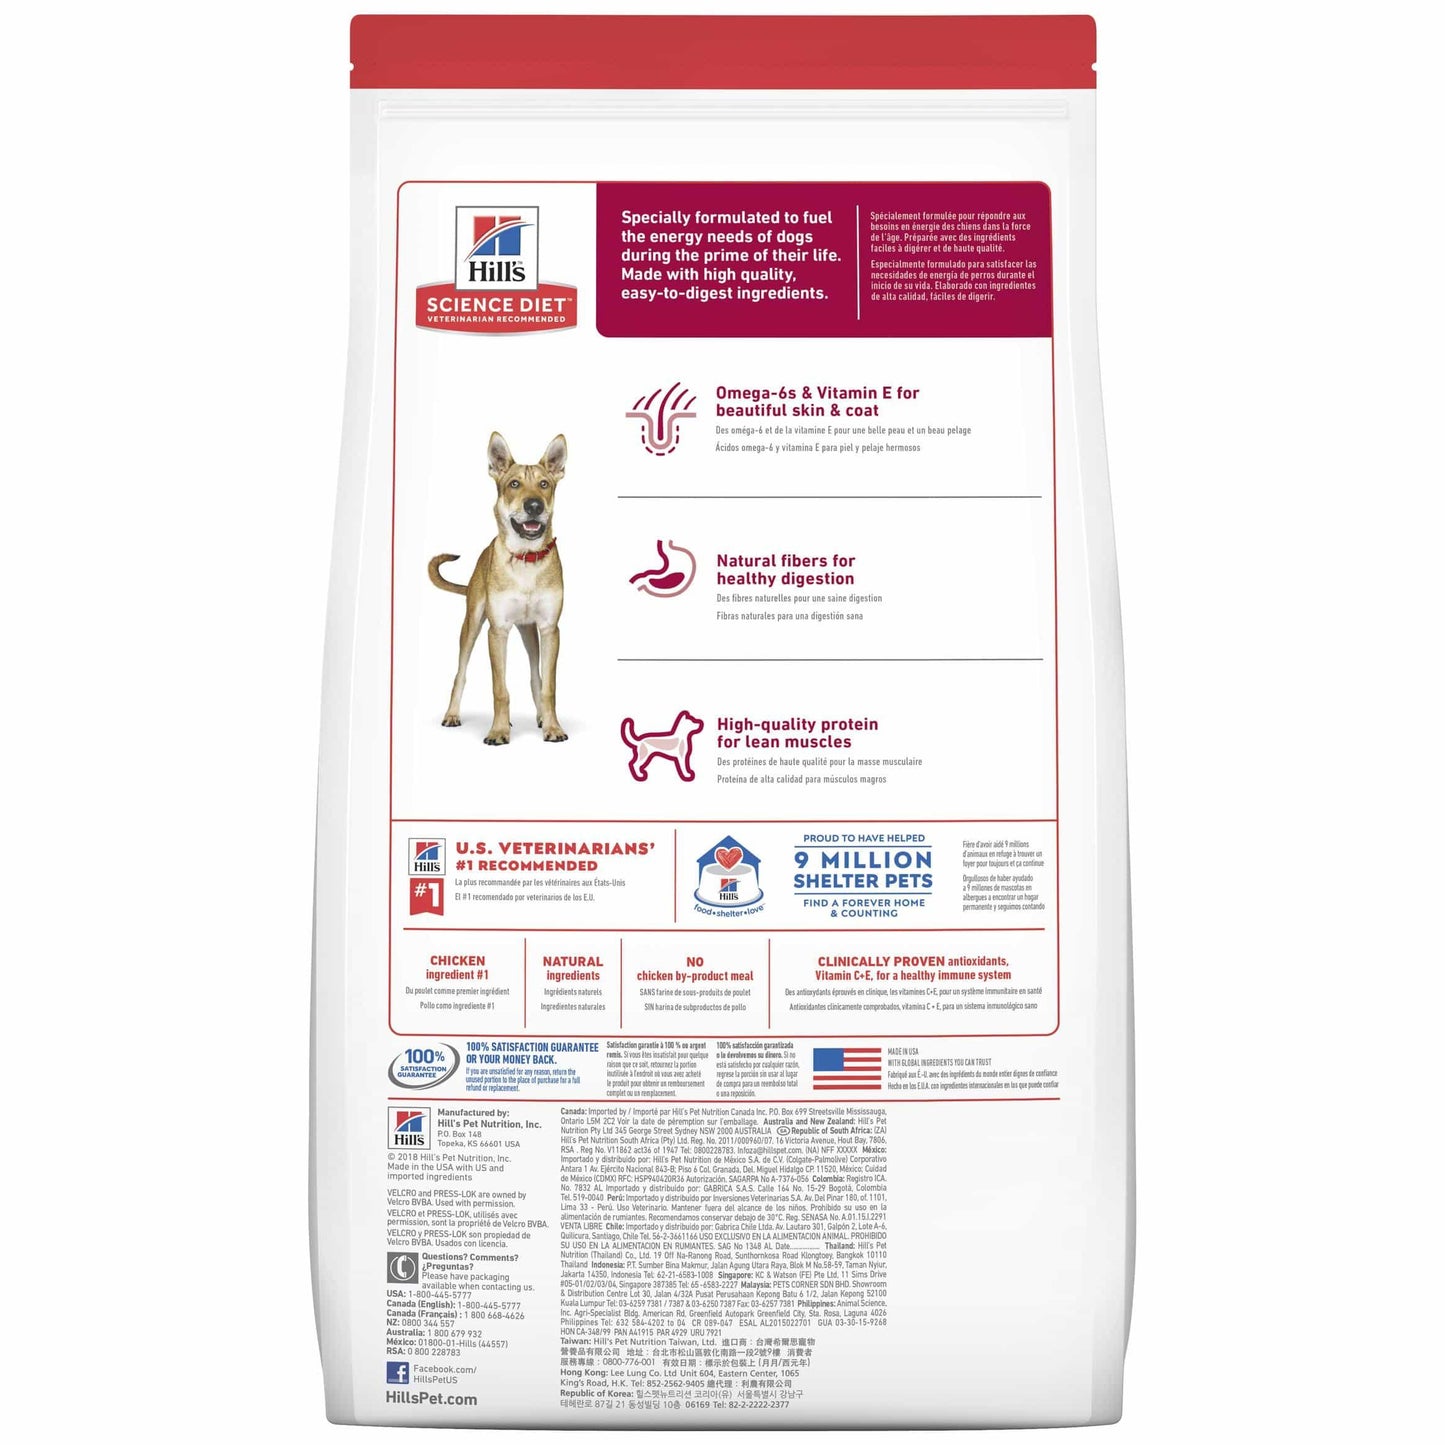 Hill's Science Diet Adult Dog Food